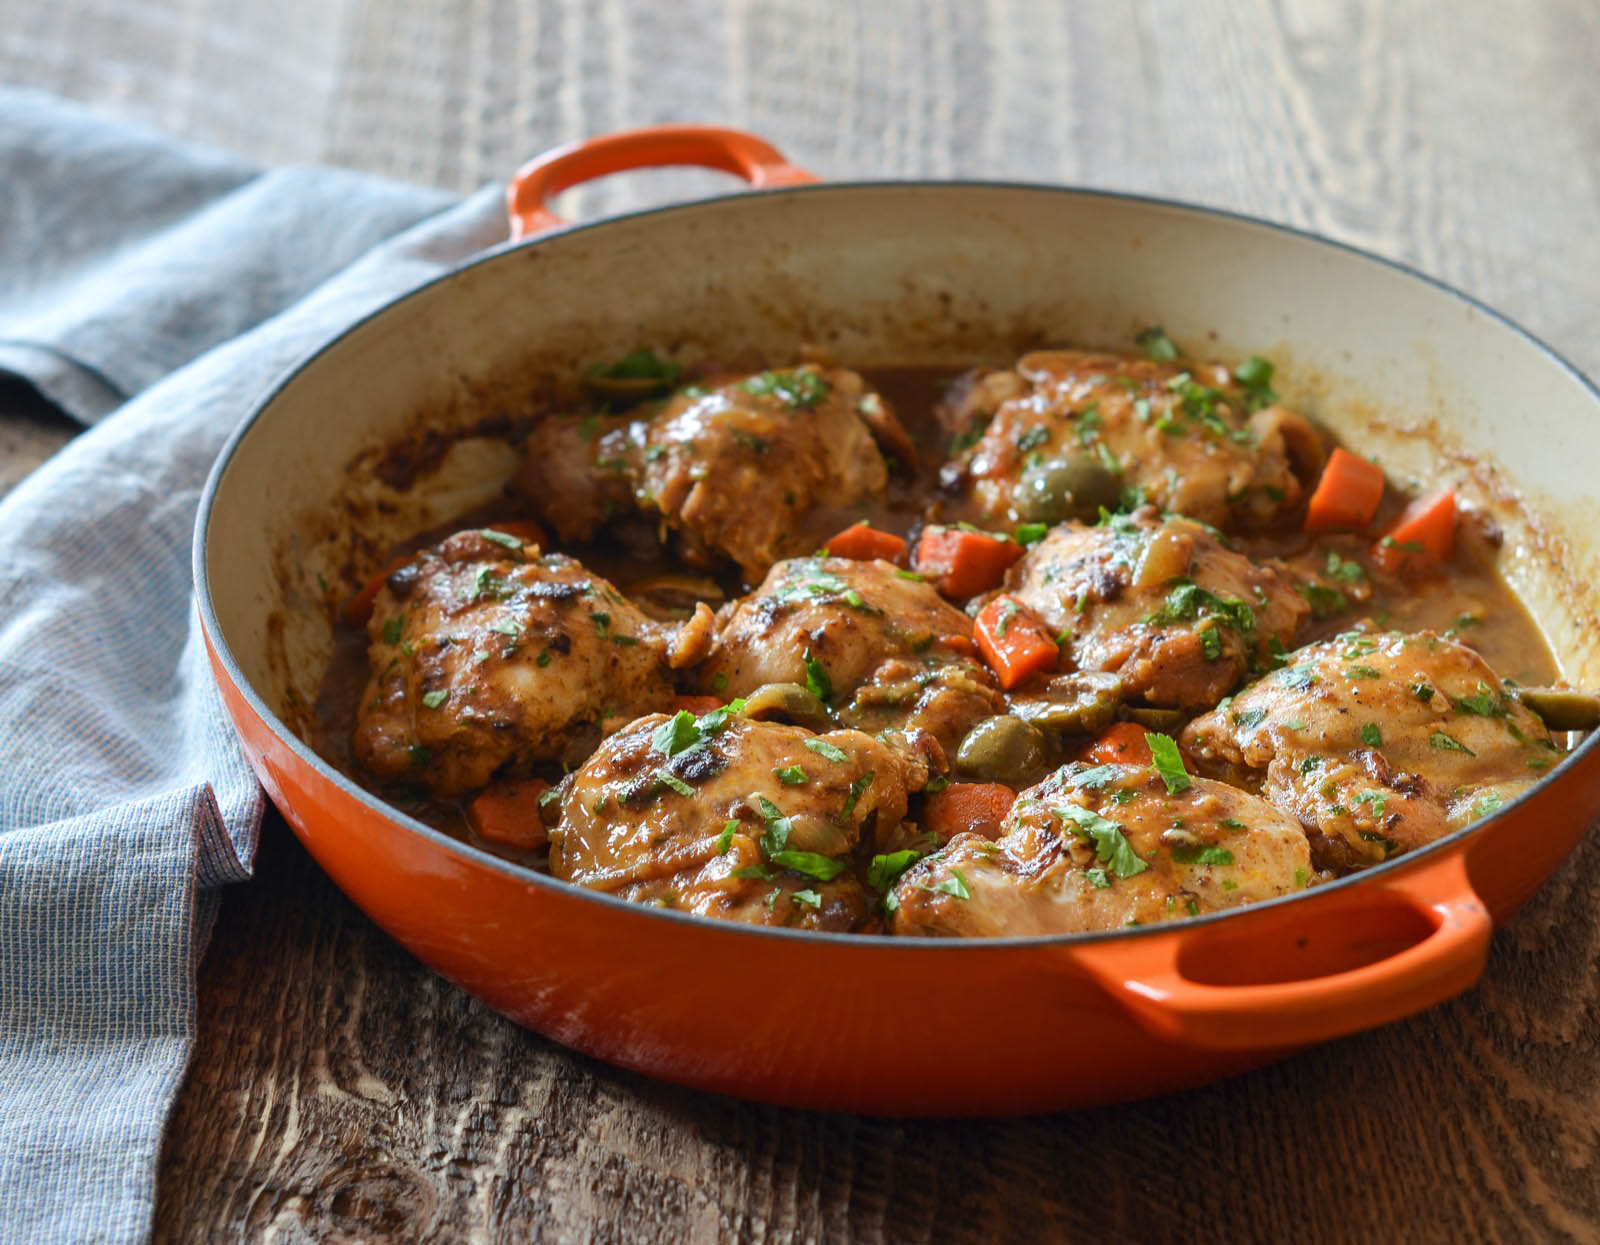 Wanna Know If You Have Enough General Knowledge? Take This Quiz to Find Out Moroccan Chicken Tagine